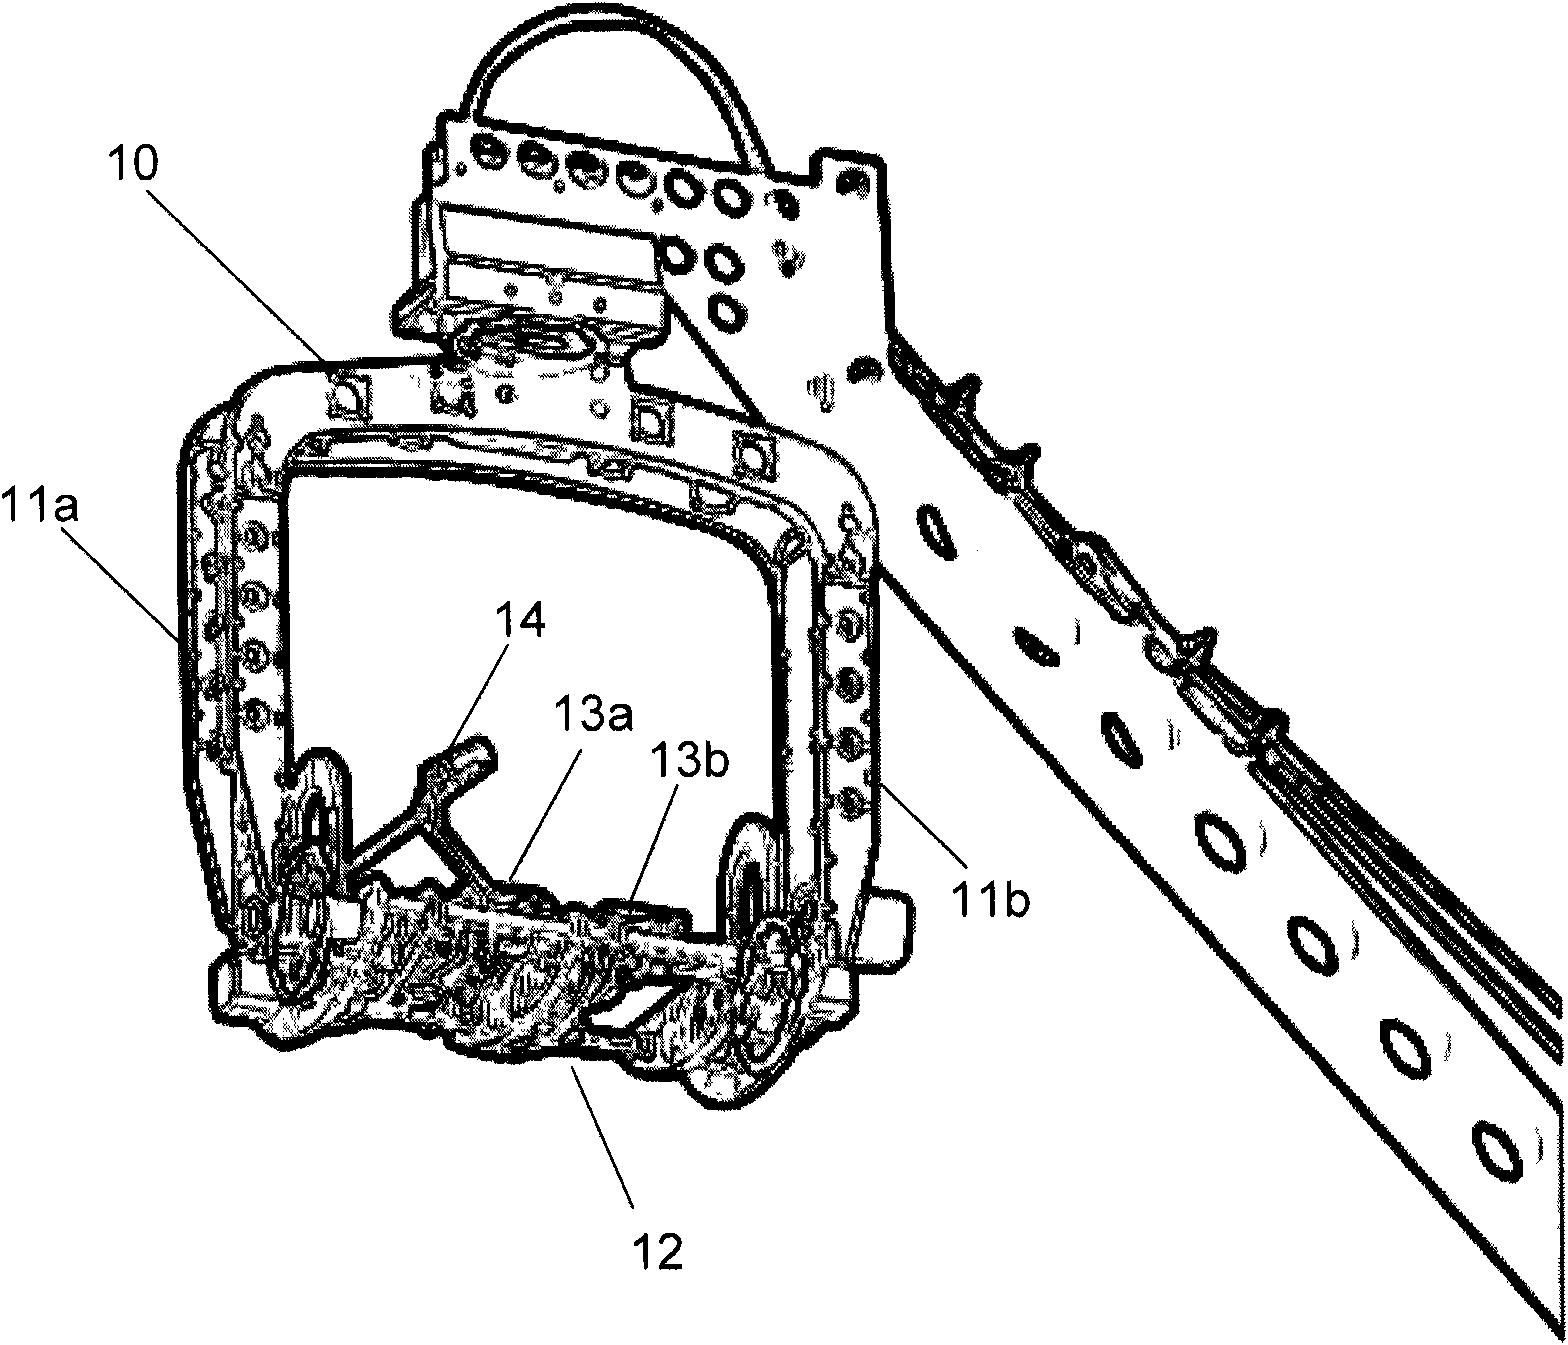 Stereo video shooting device